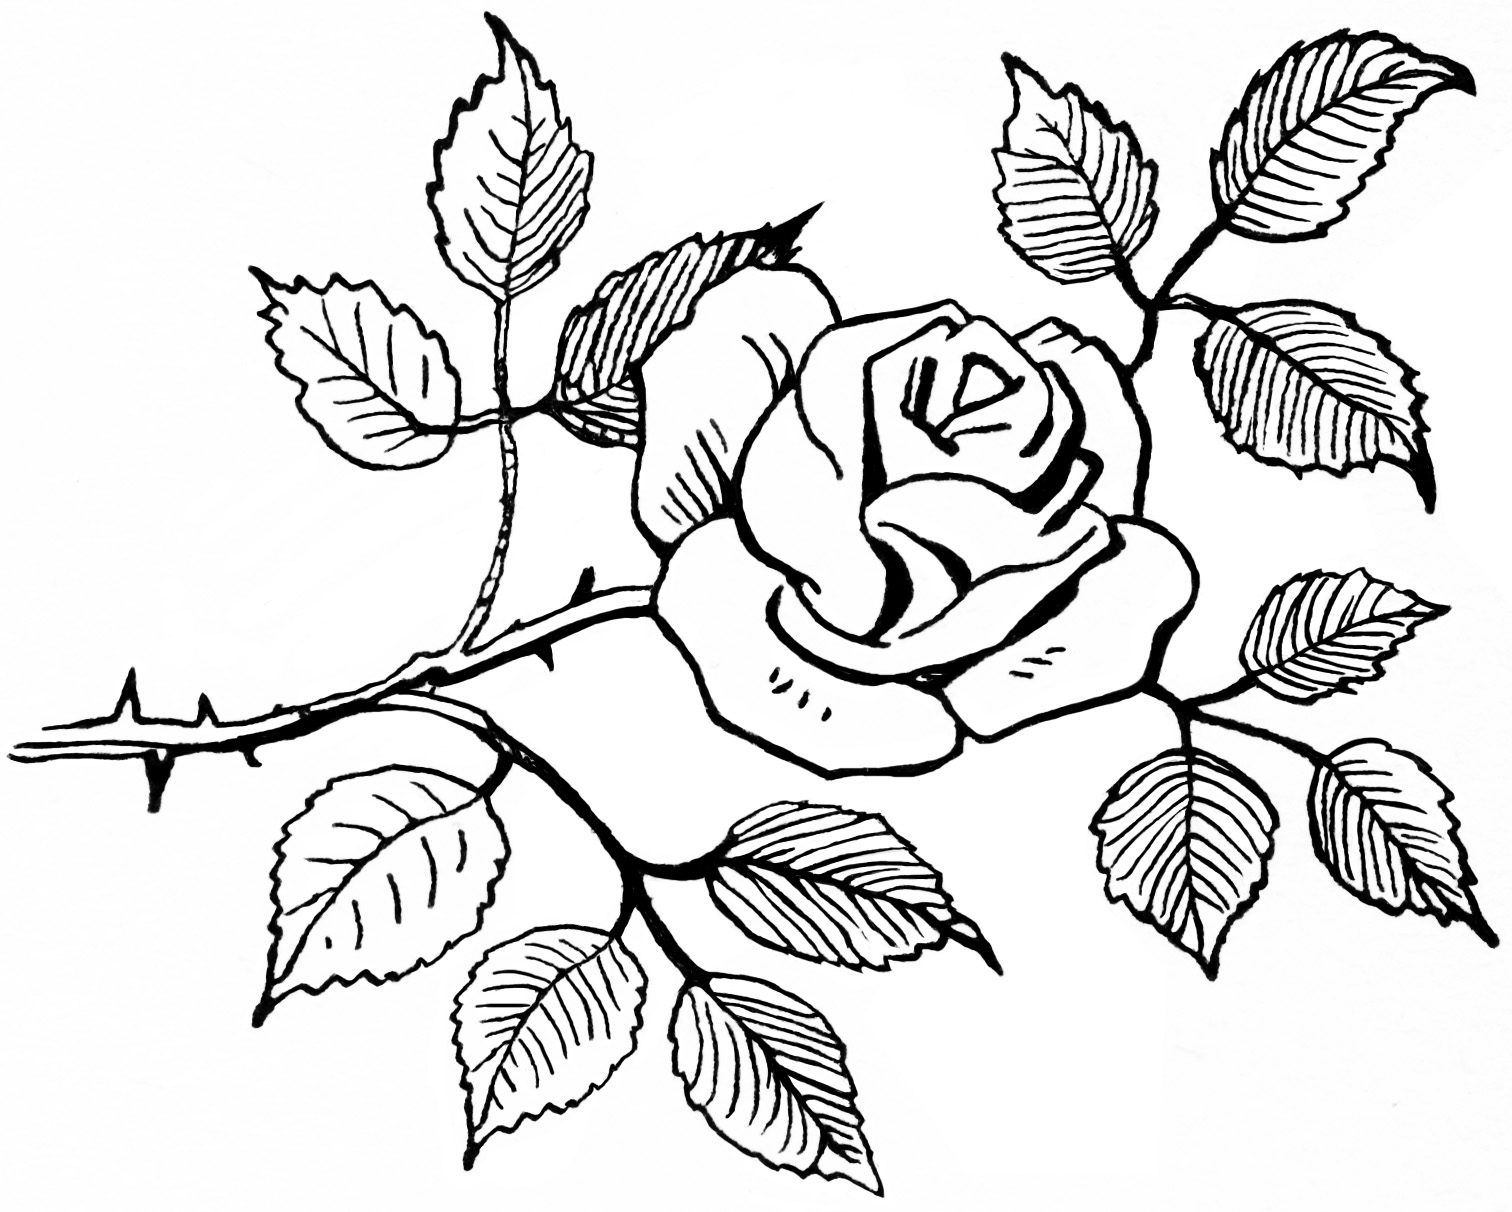 Free Black And White Rose Drawings, Download Free Clip Art